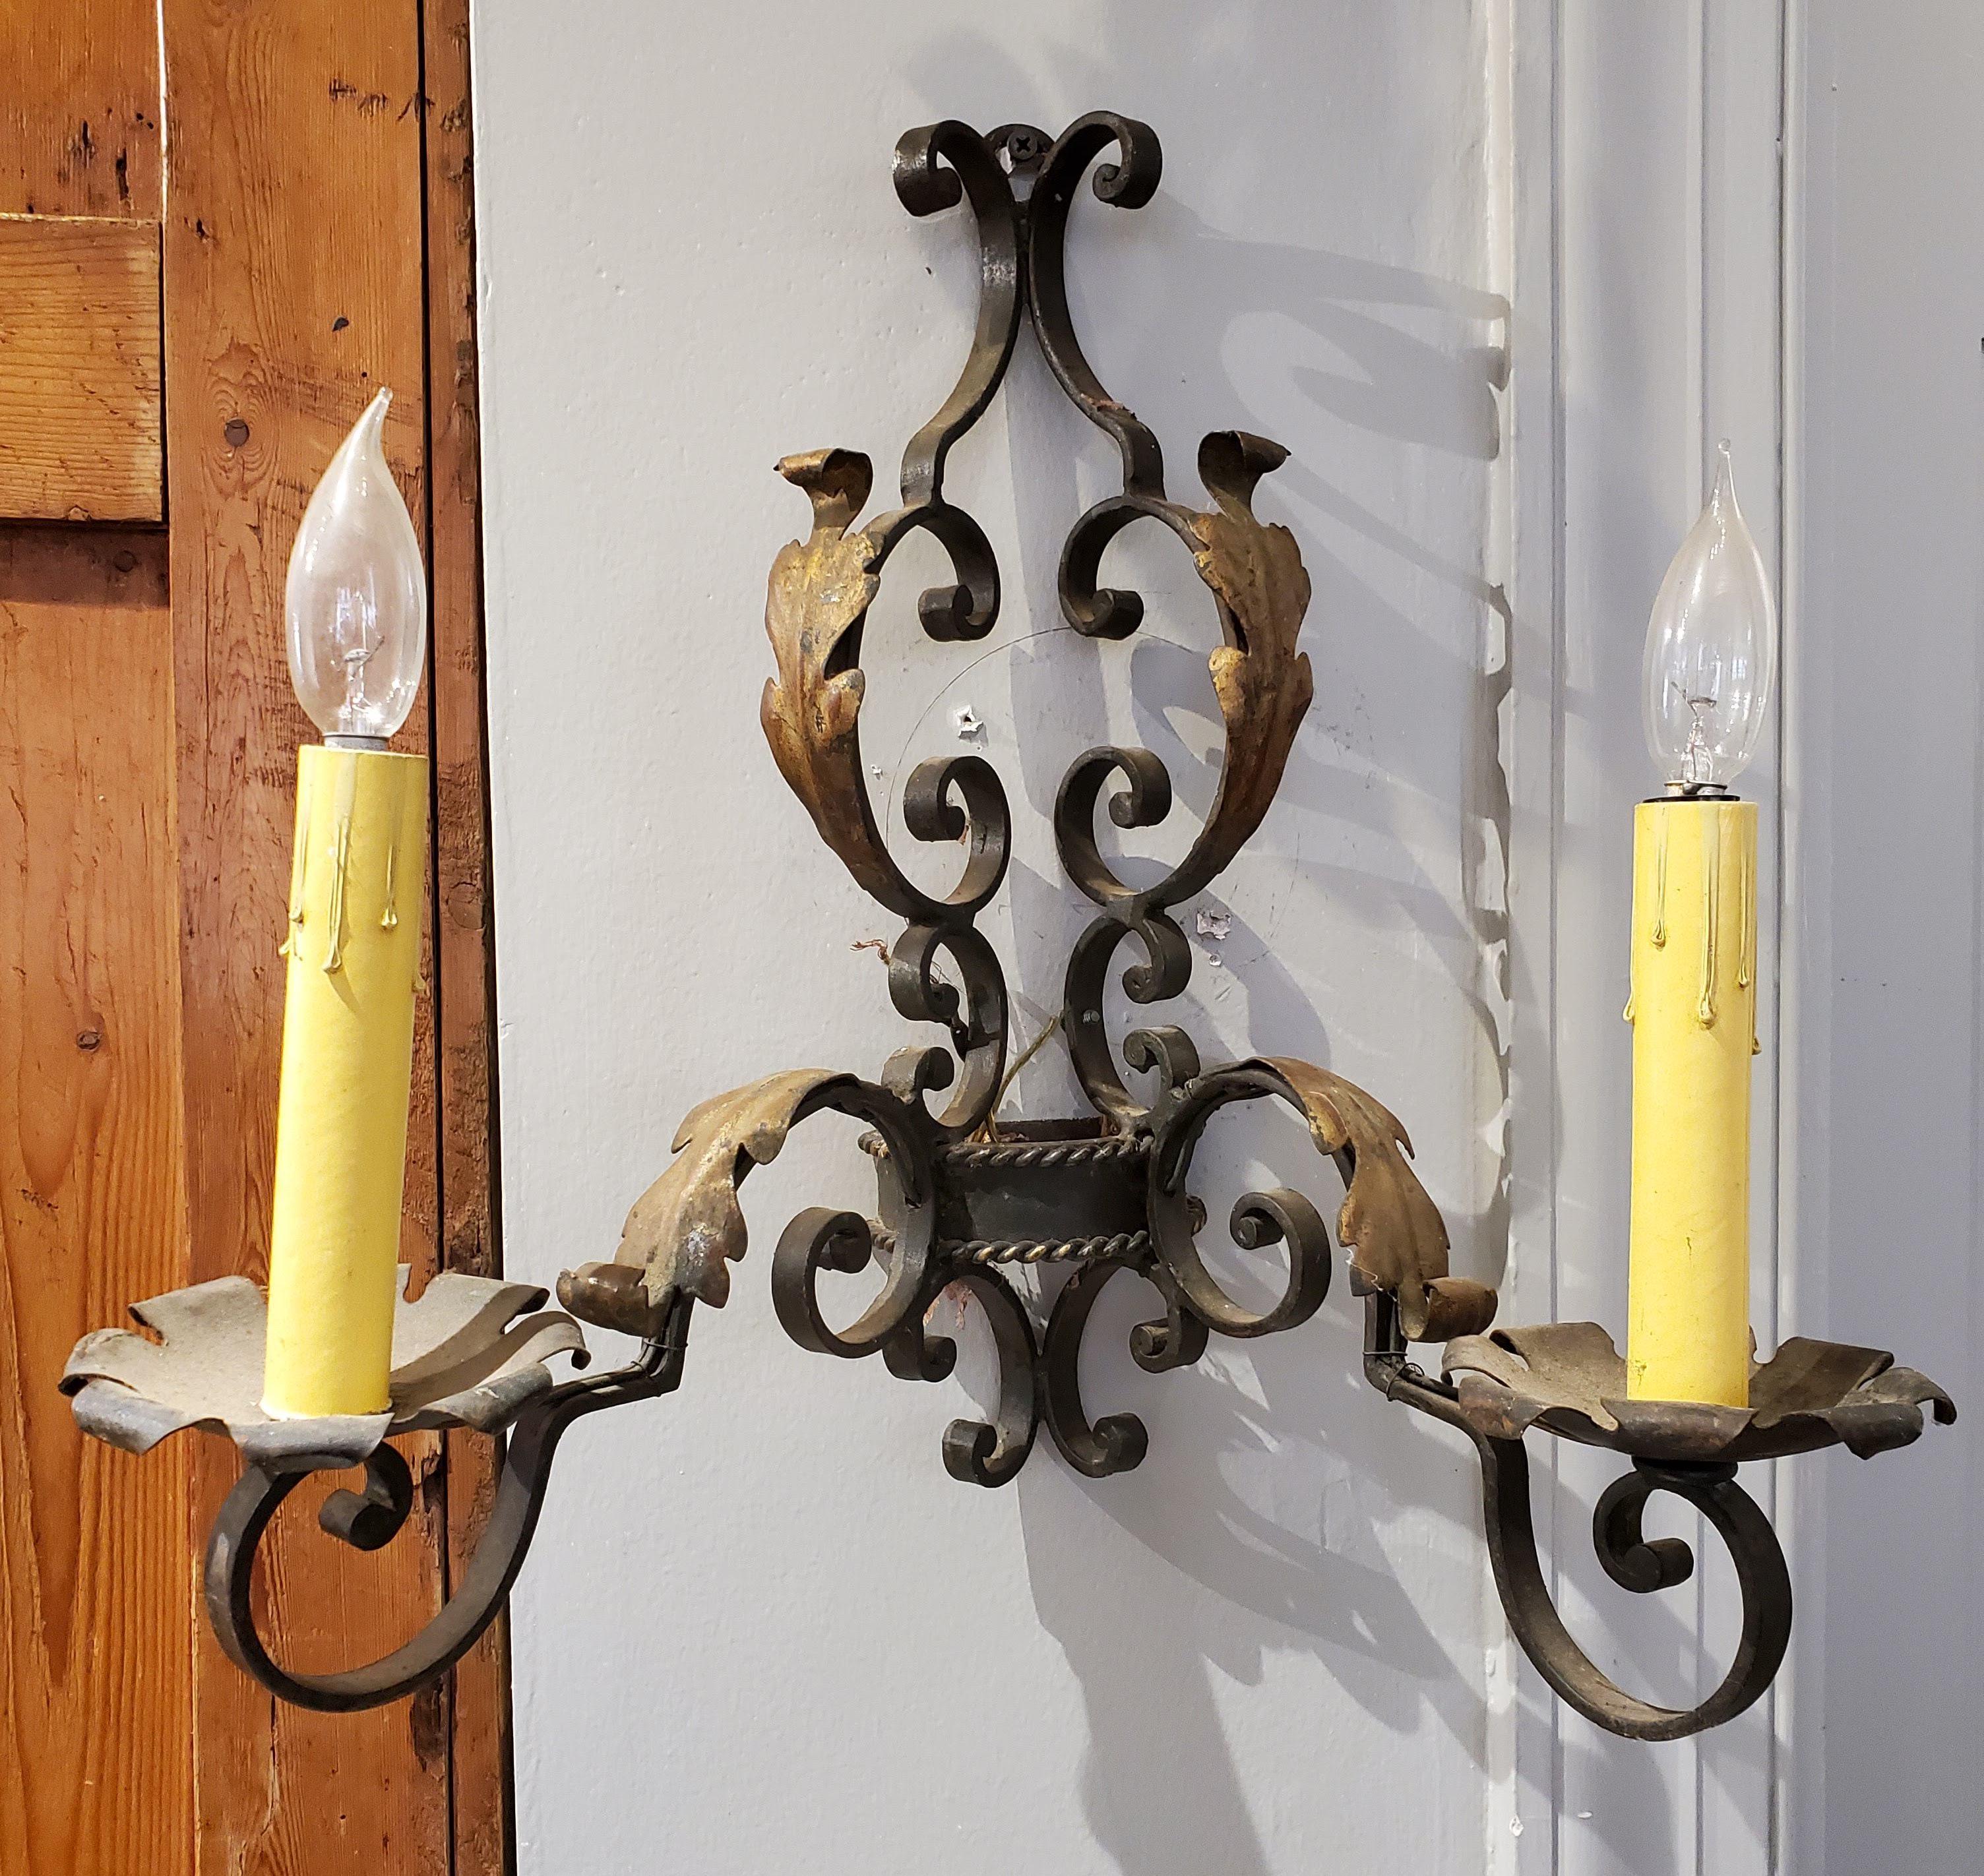 A lovely pair of Classic late 19th century french Provincial wrought iron wall sconces with two candle lights each with gilded and patinated bronze color finish. Not currently wired for electricity. Can be rewired upon request and additional